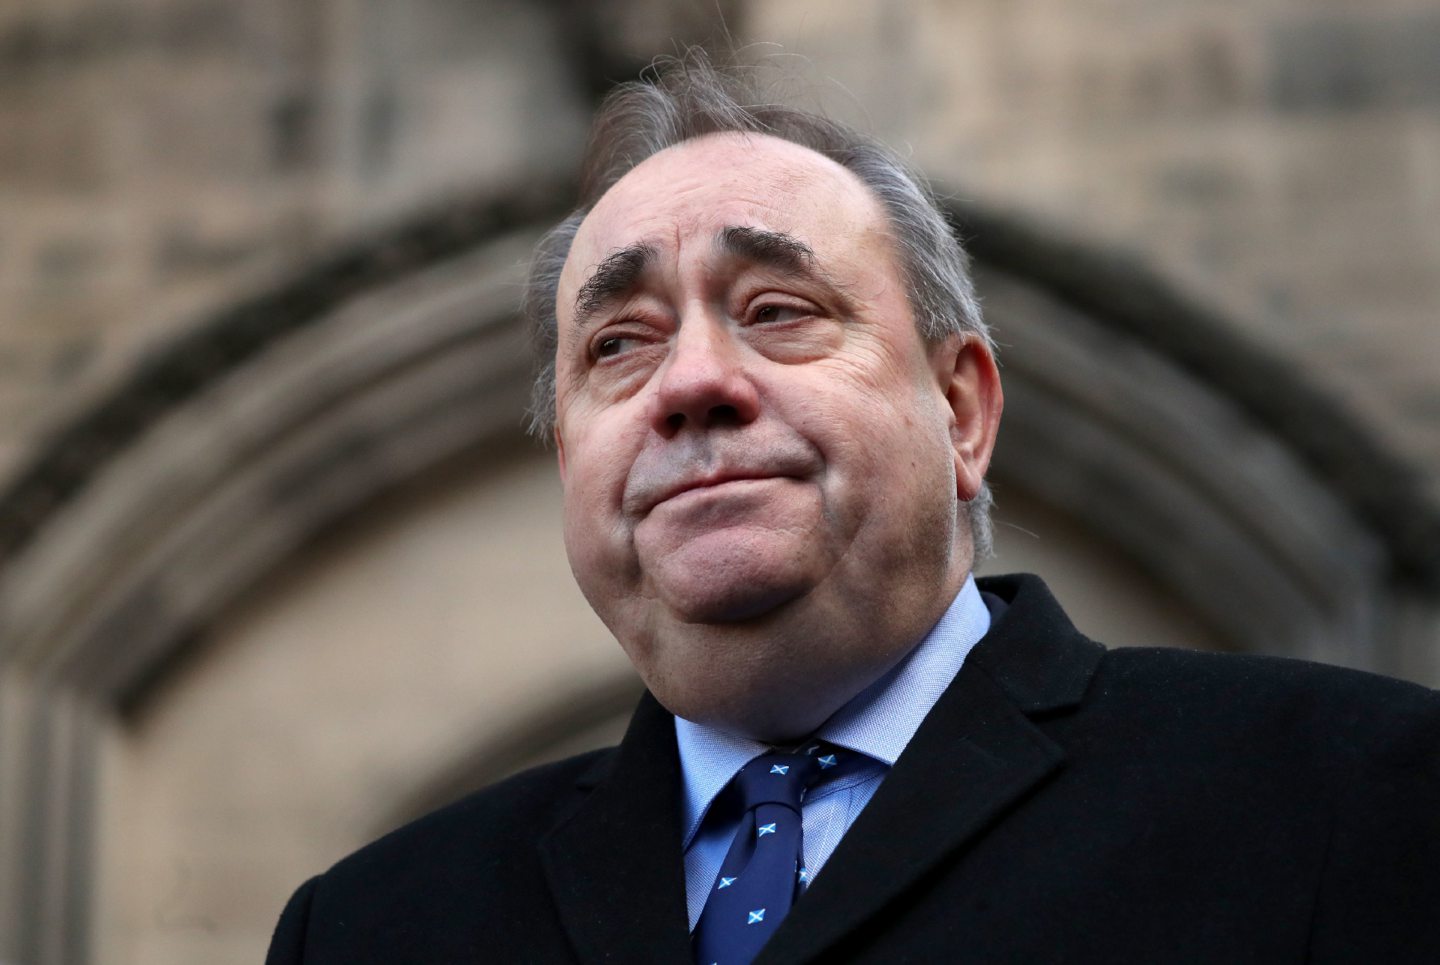 Three inquiries have been launched into the way complaints against Alex Salmond were handled.